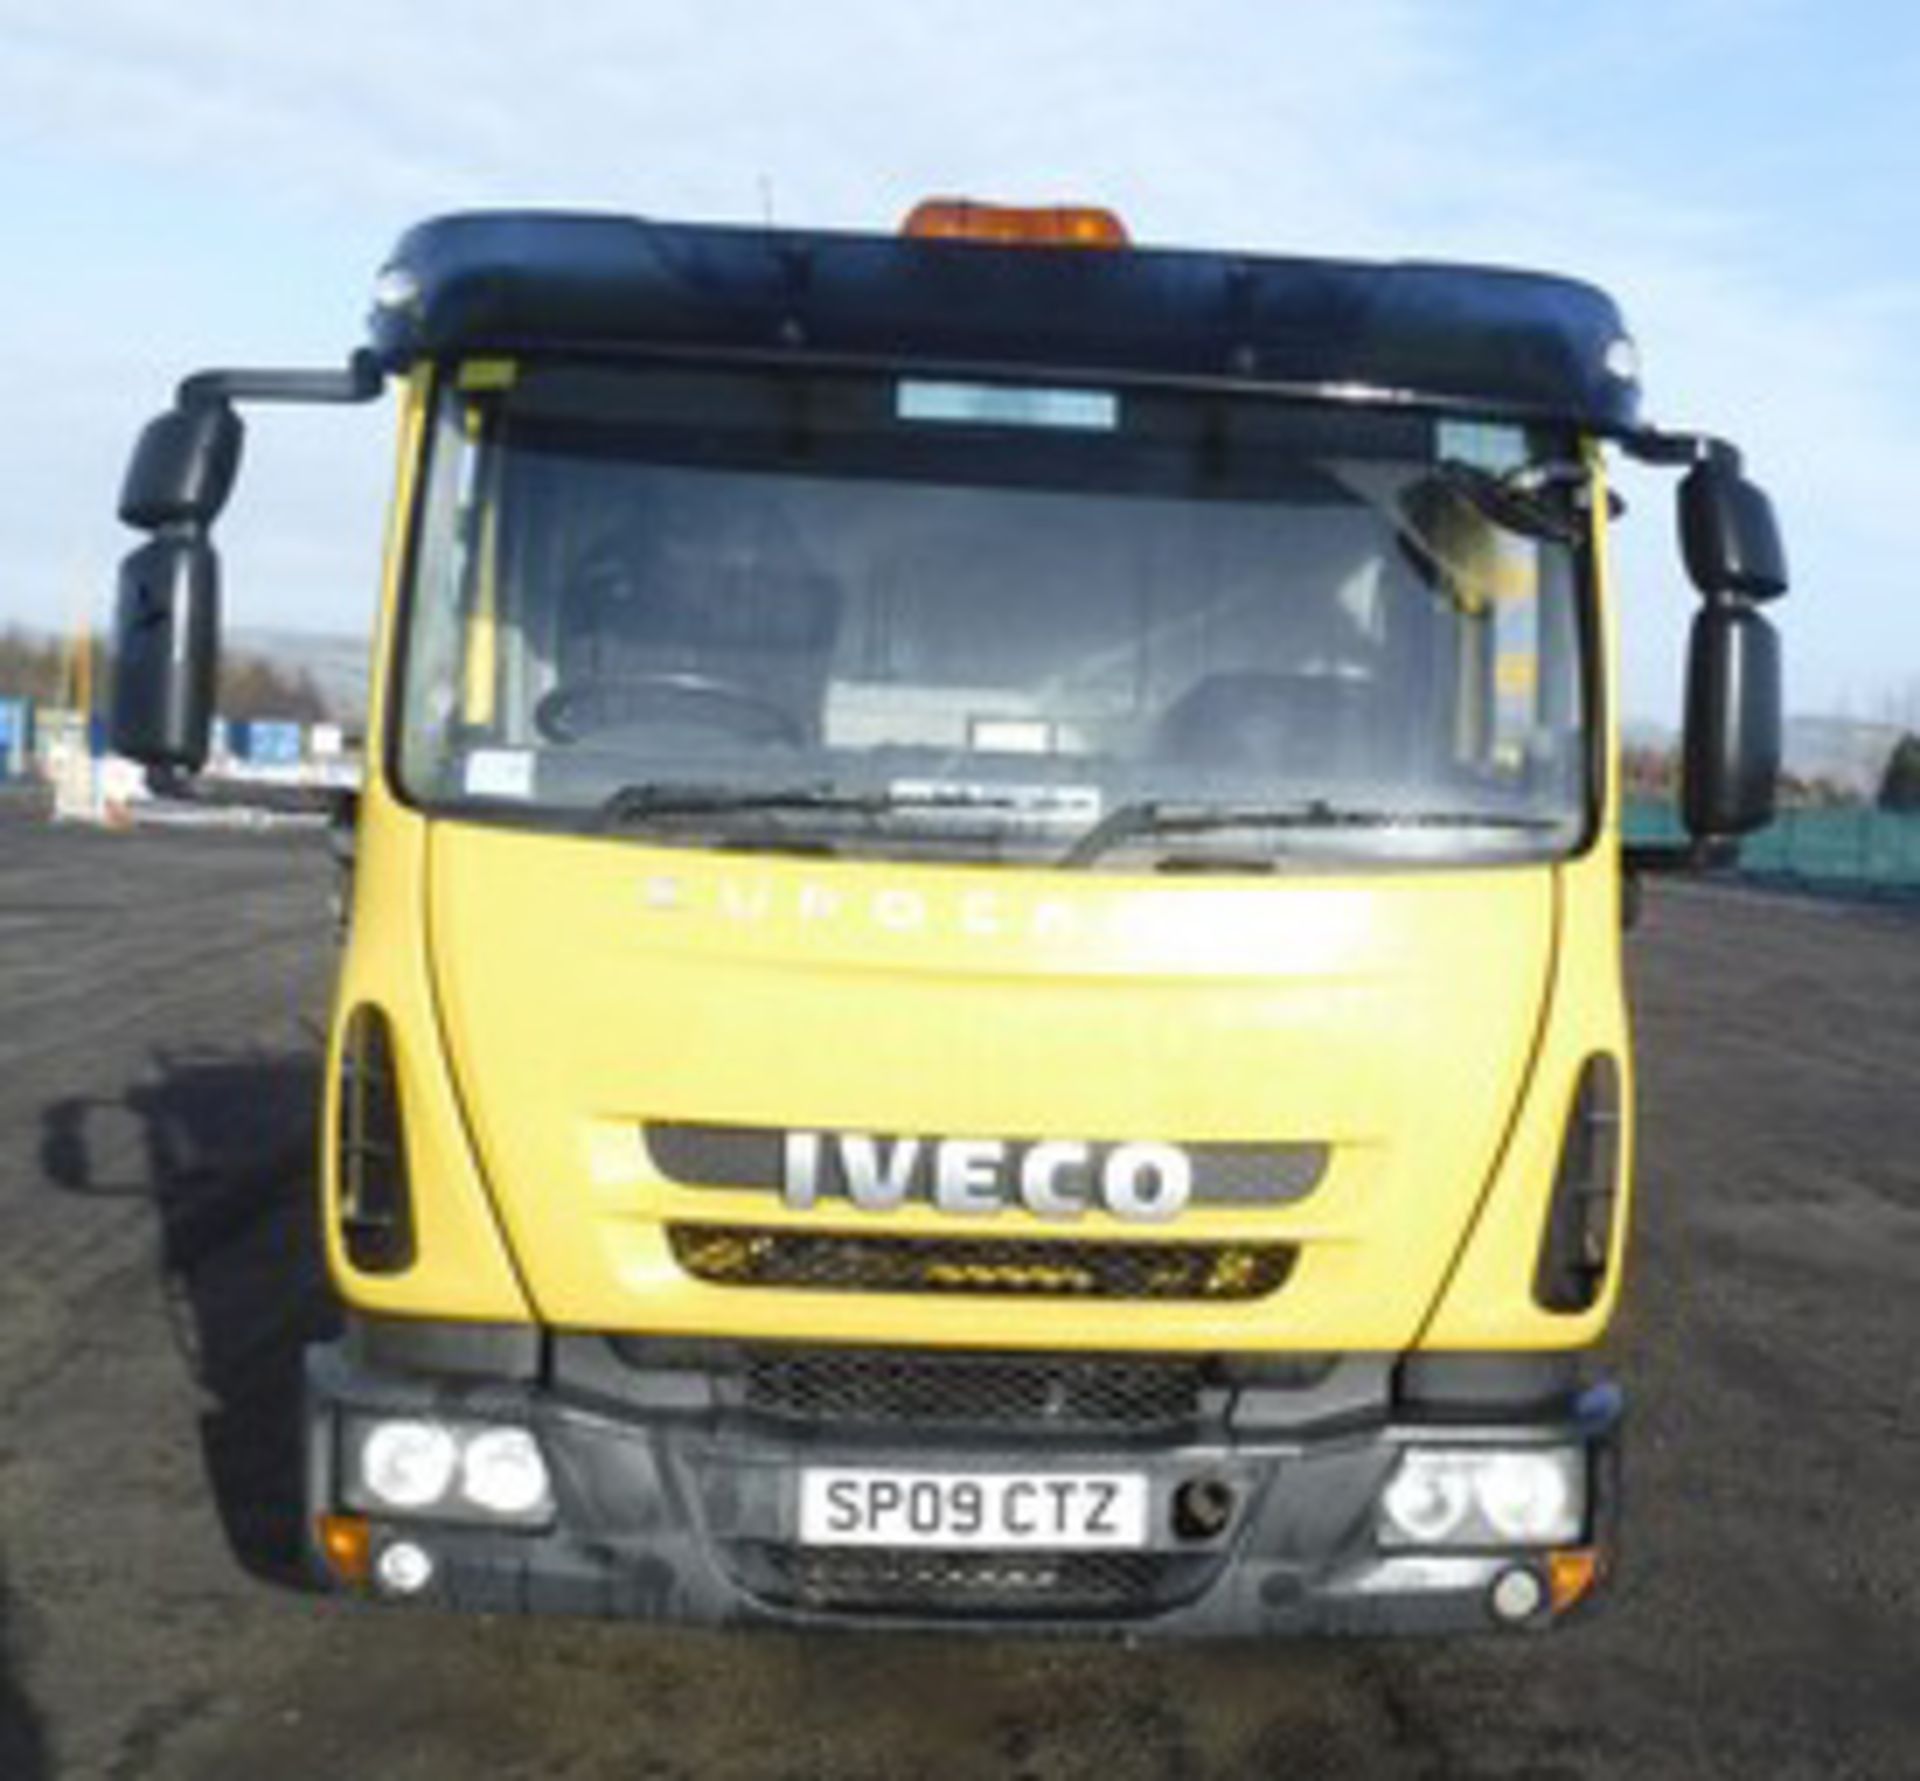 IVECO MODEL EUROCARGO (MY 2008) - 3920cc - Image 14 of 19